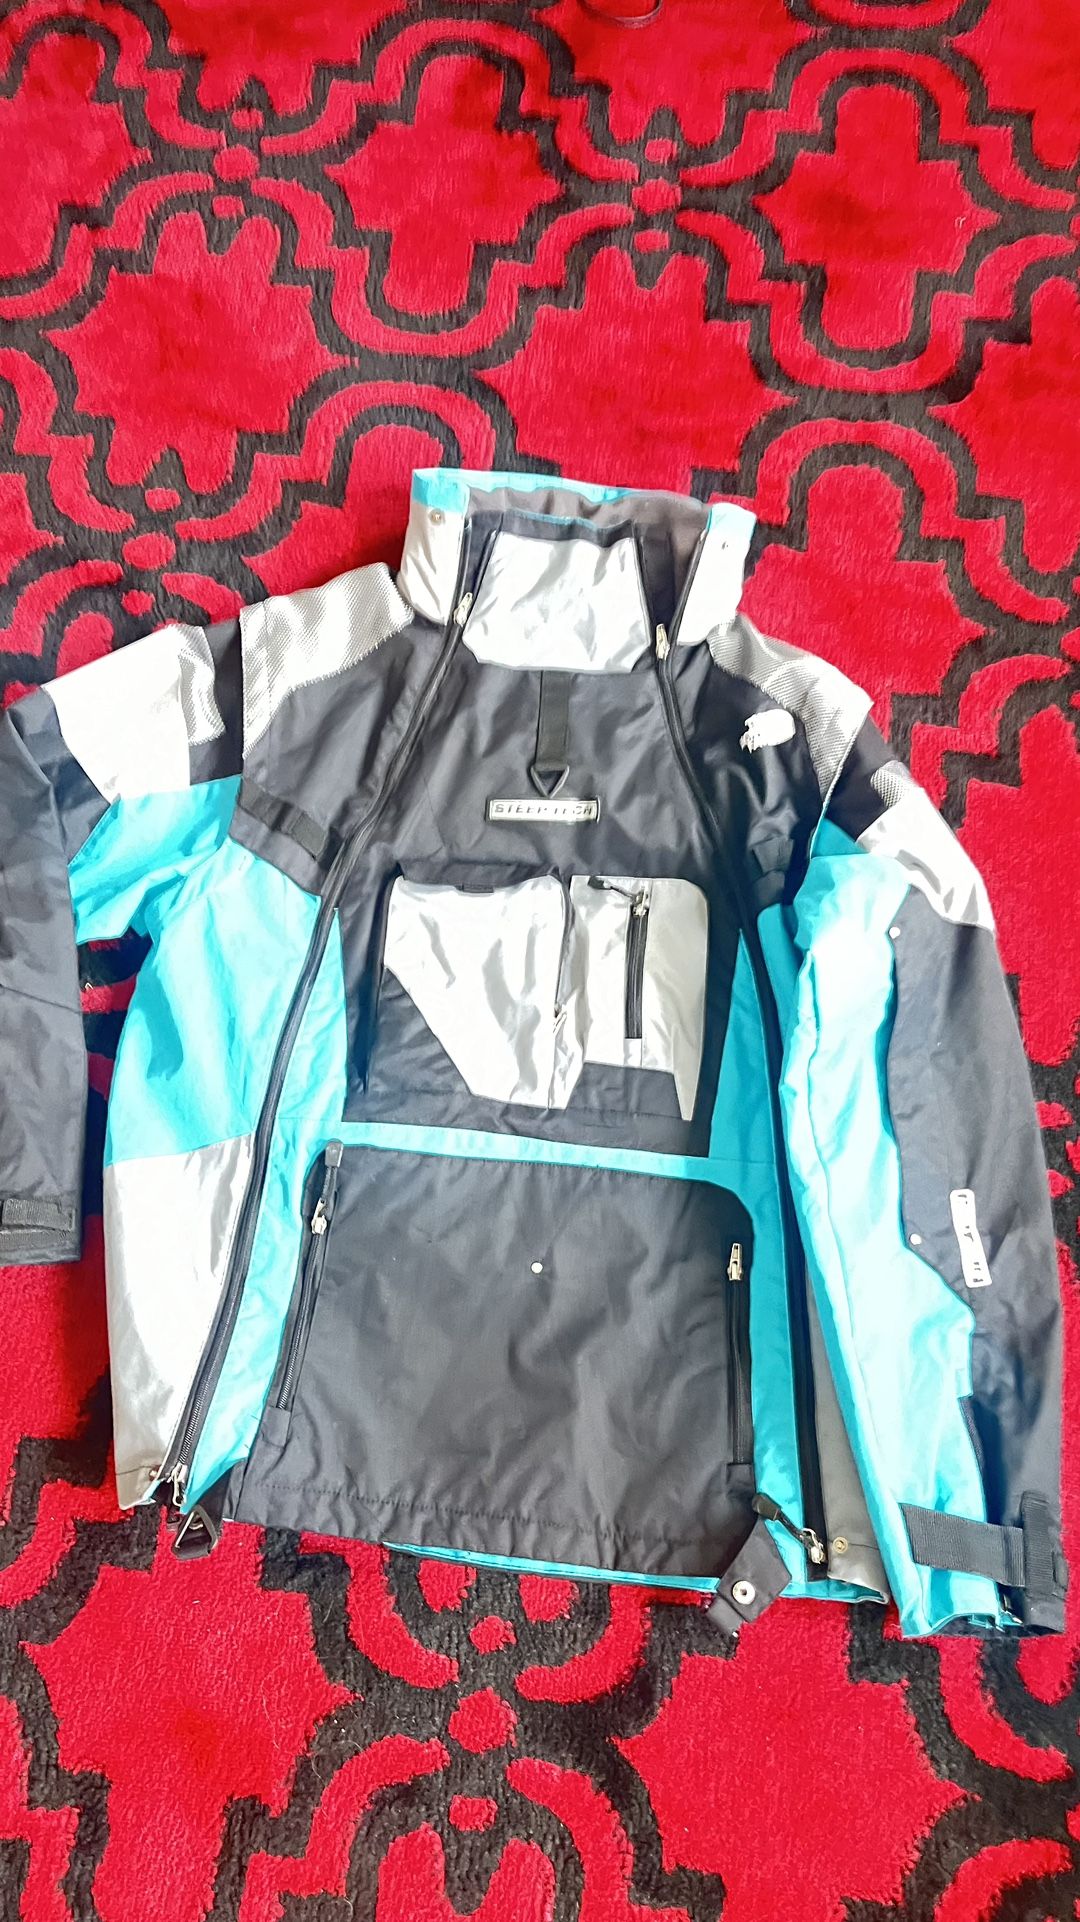 North face steep Jacket (Blue and Black)